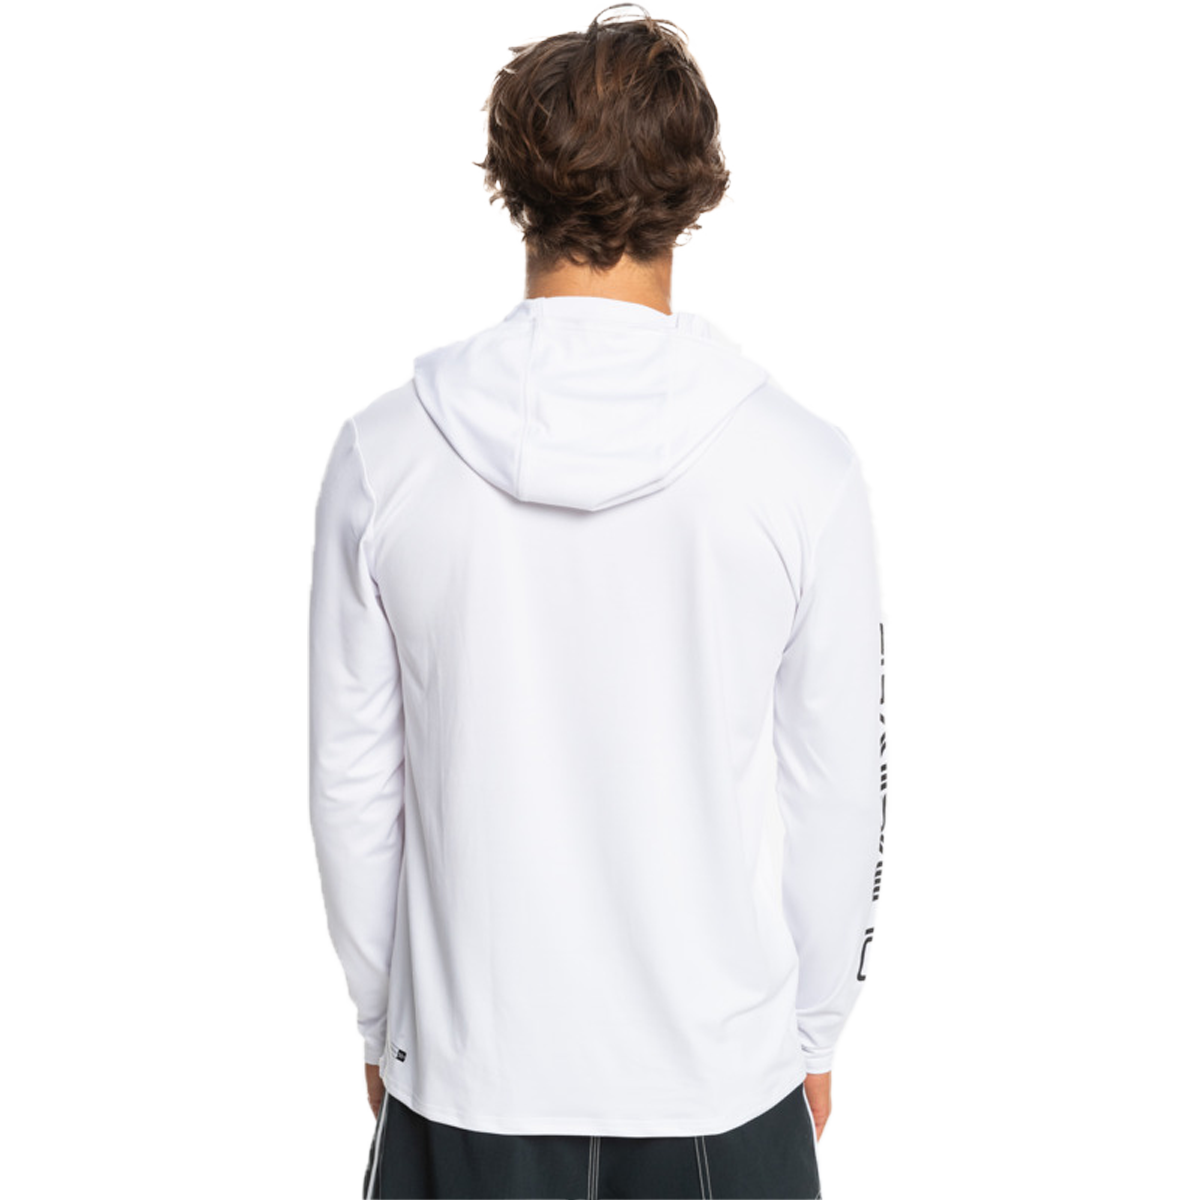 Quiksilver Omni Session Hooded Long-Sleeve Shirt - Men's - Clothing